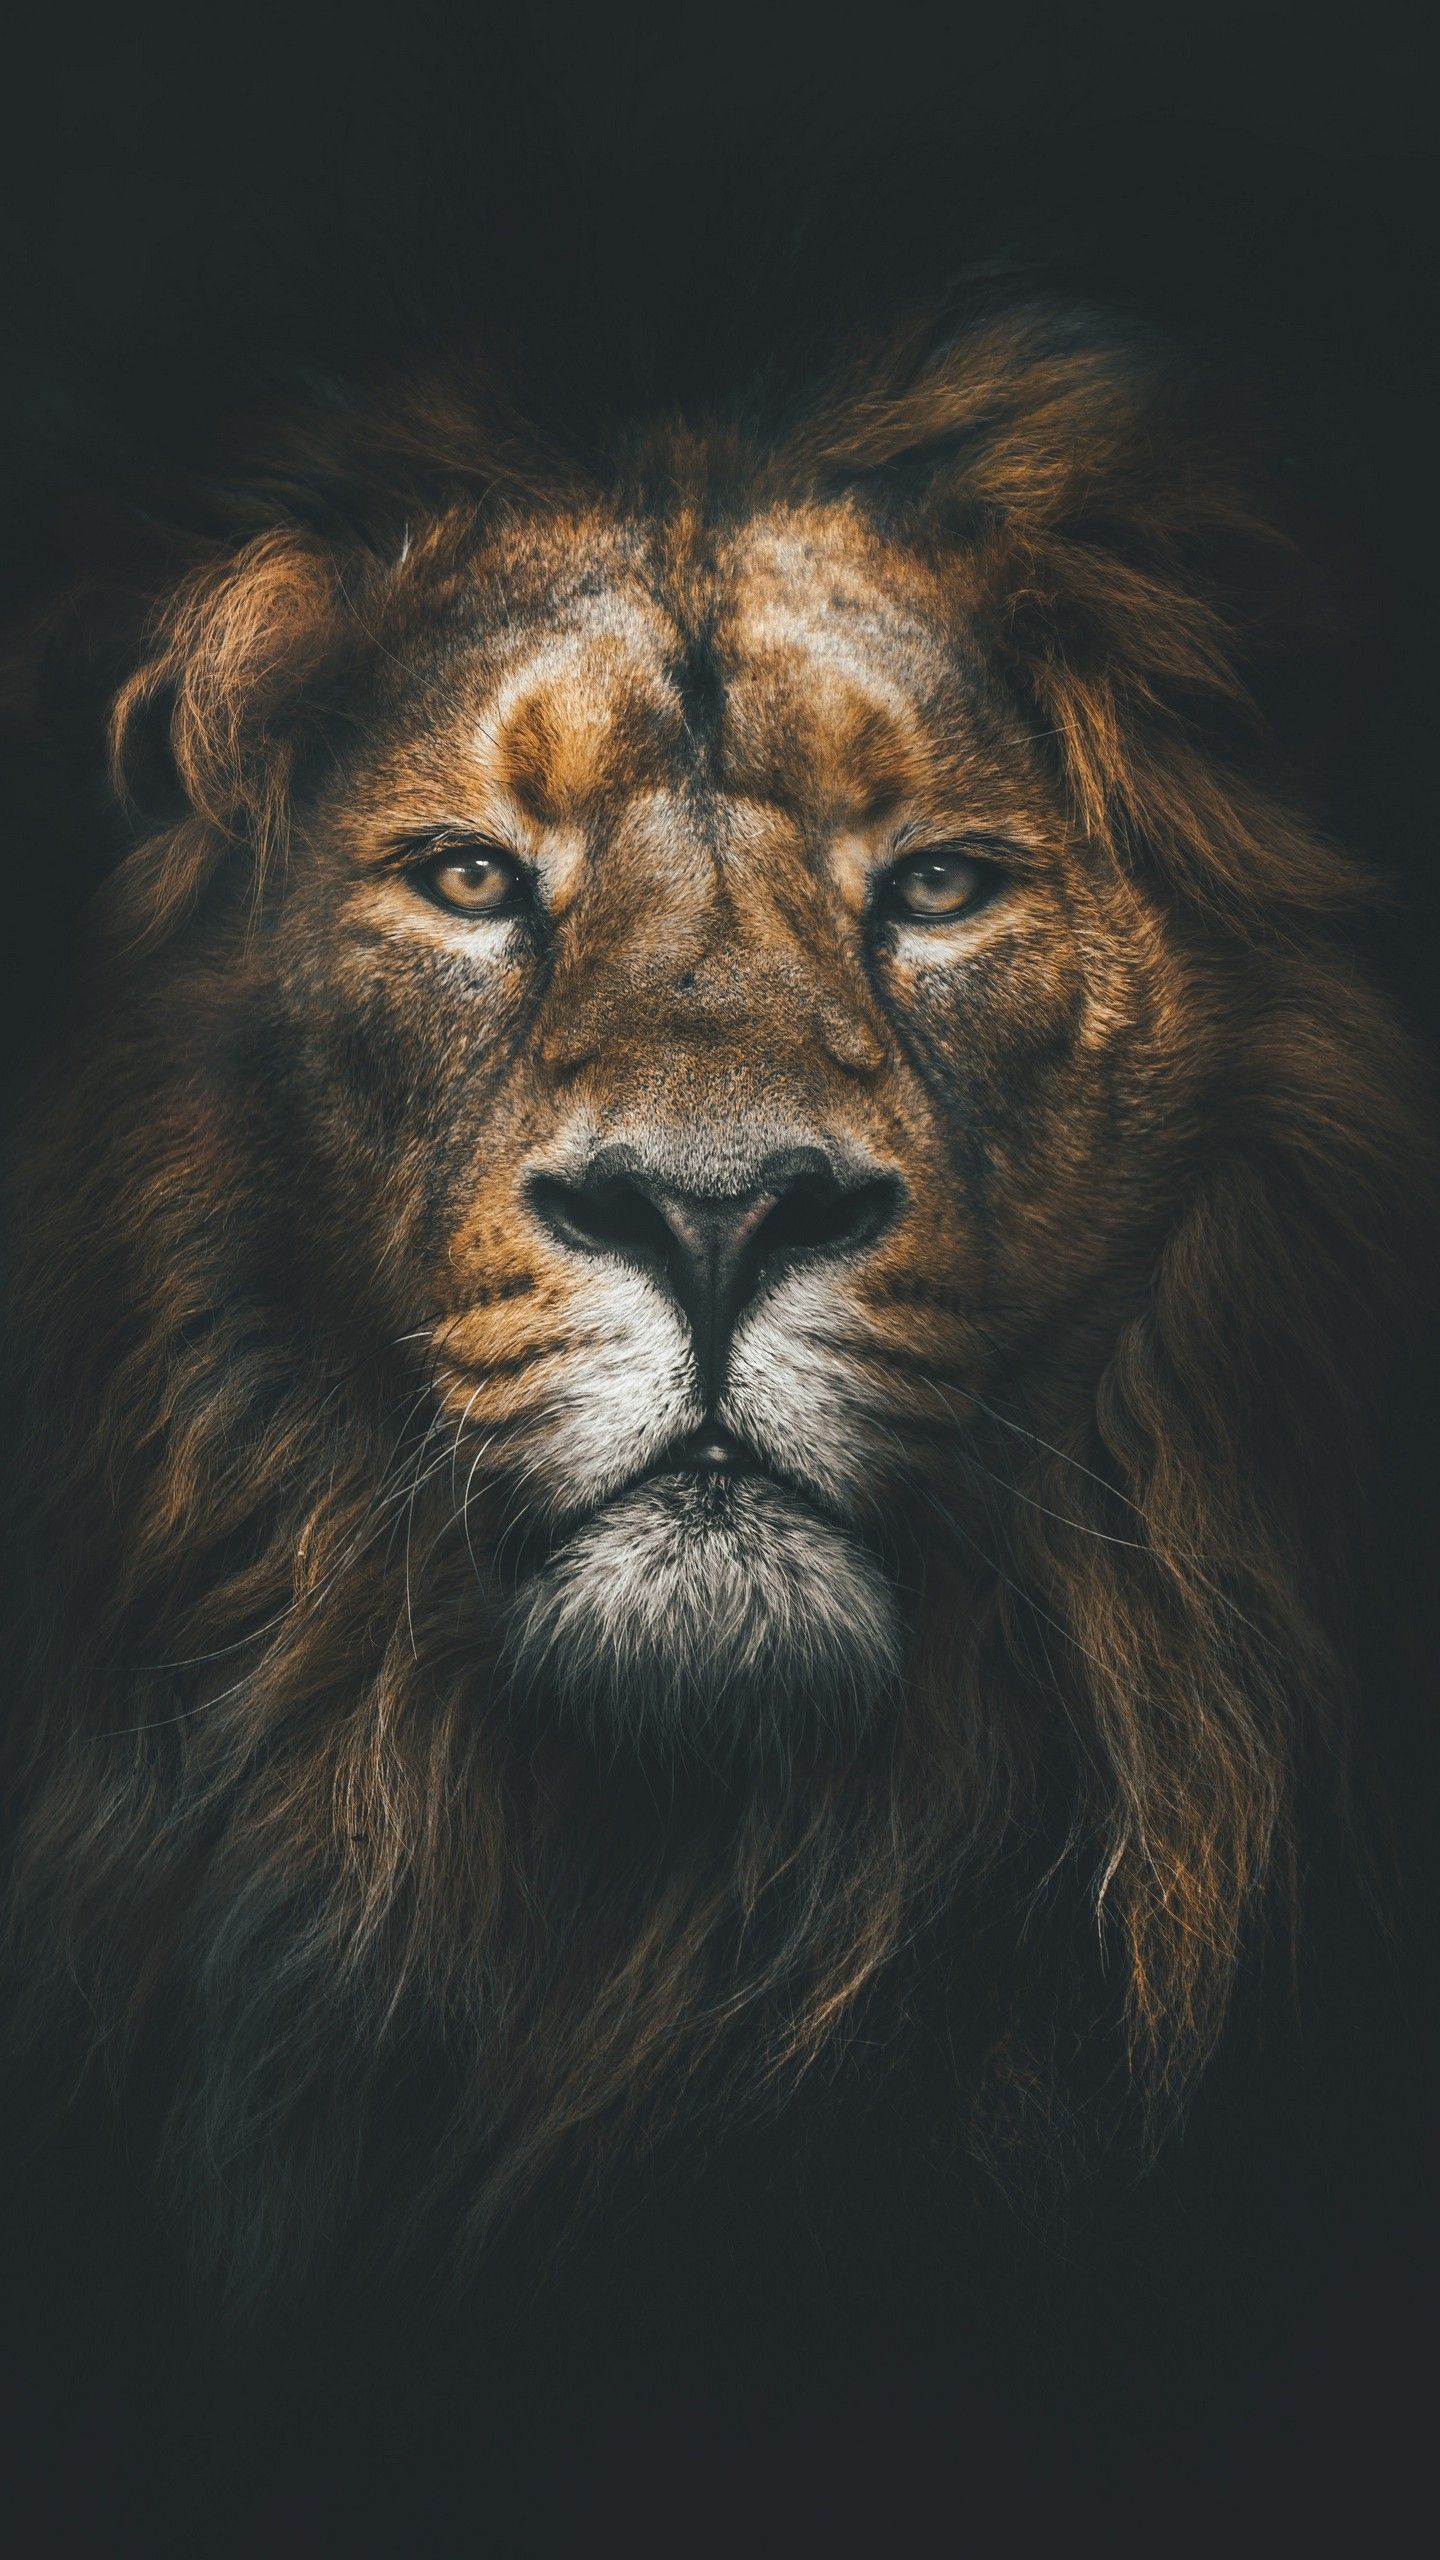 Powerful Lion HD Wallpaper For iPhone and Android